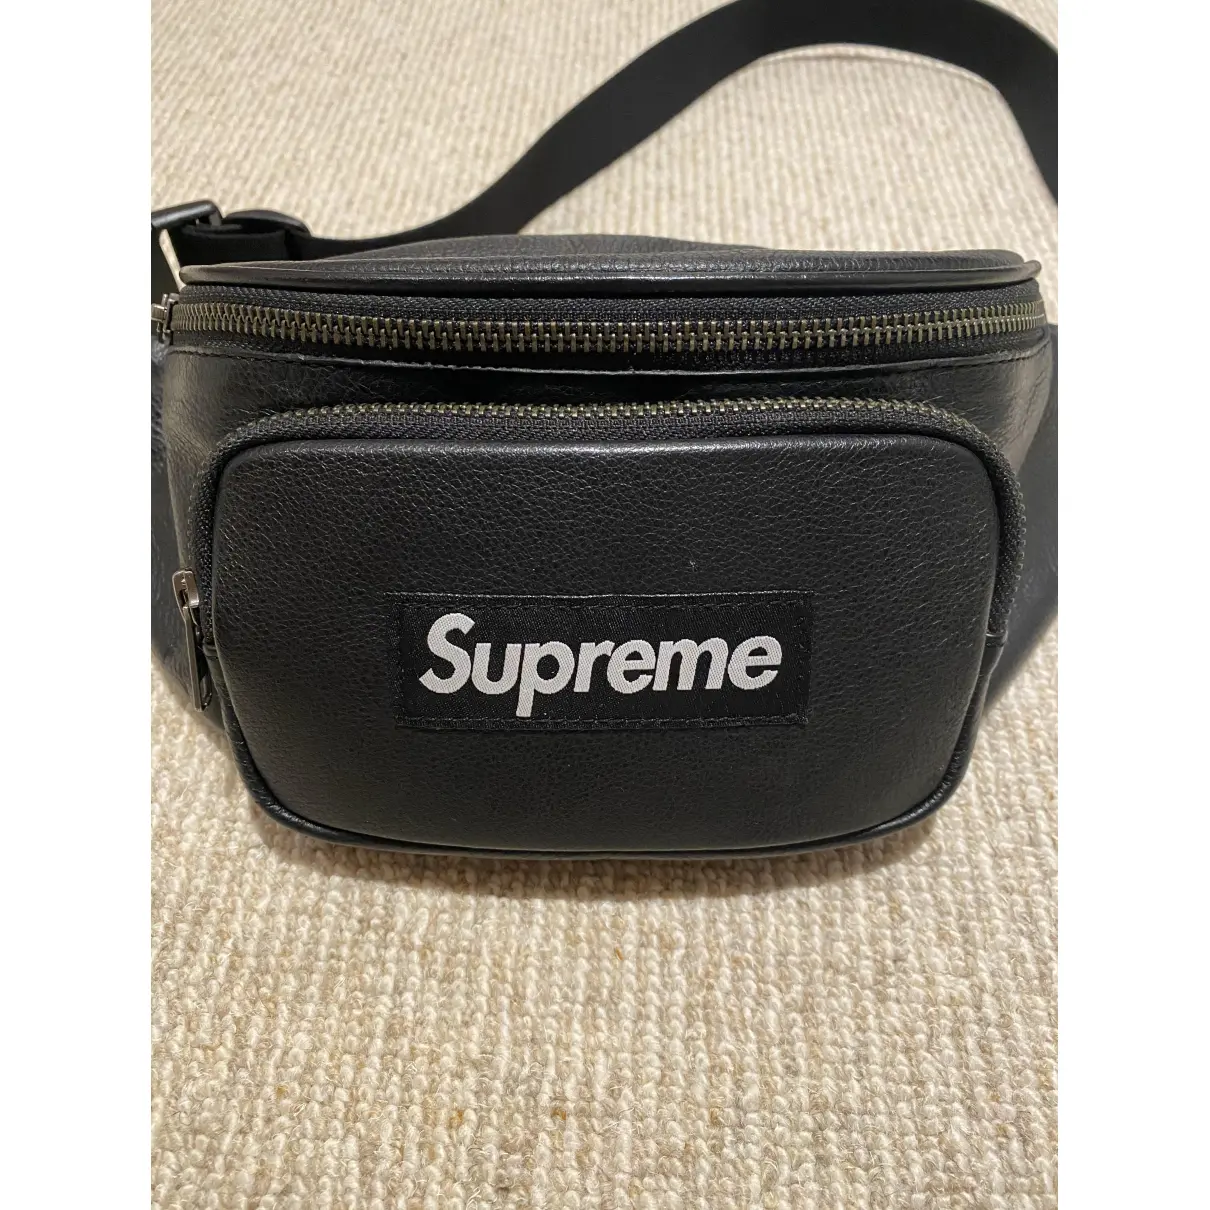 Buy Supreme Leather small bag online